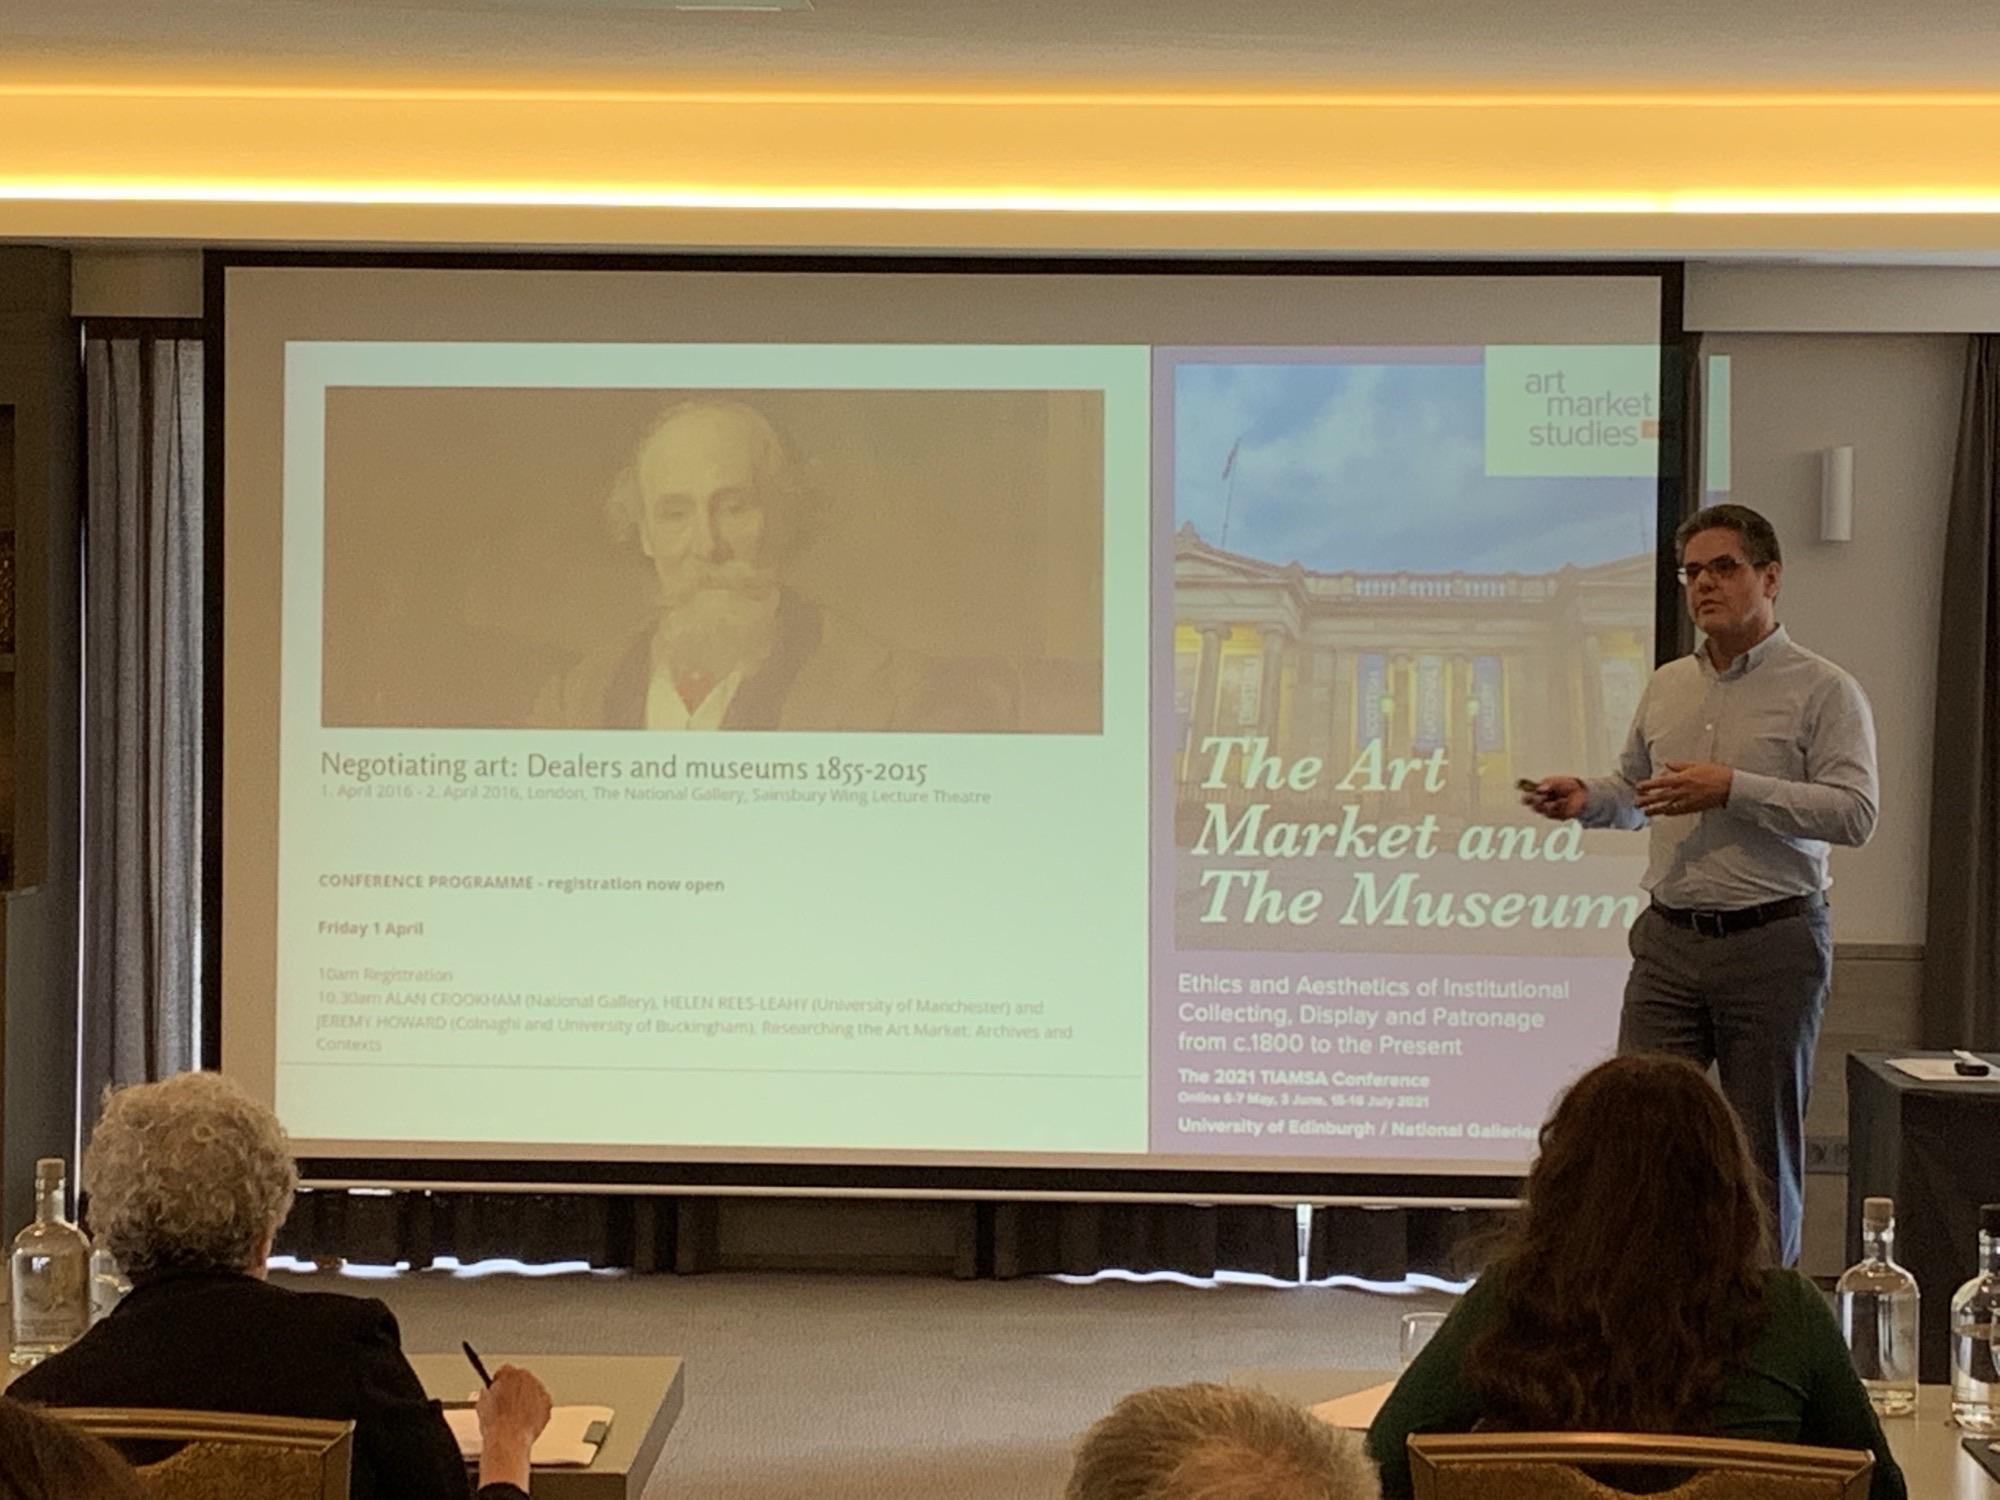 Christian Huemer (Belvedere Museum Vienna) on the digitisation of collections - Photo by Catherine E B Galli